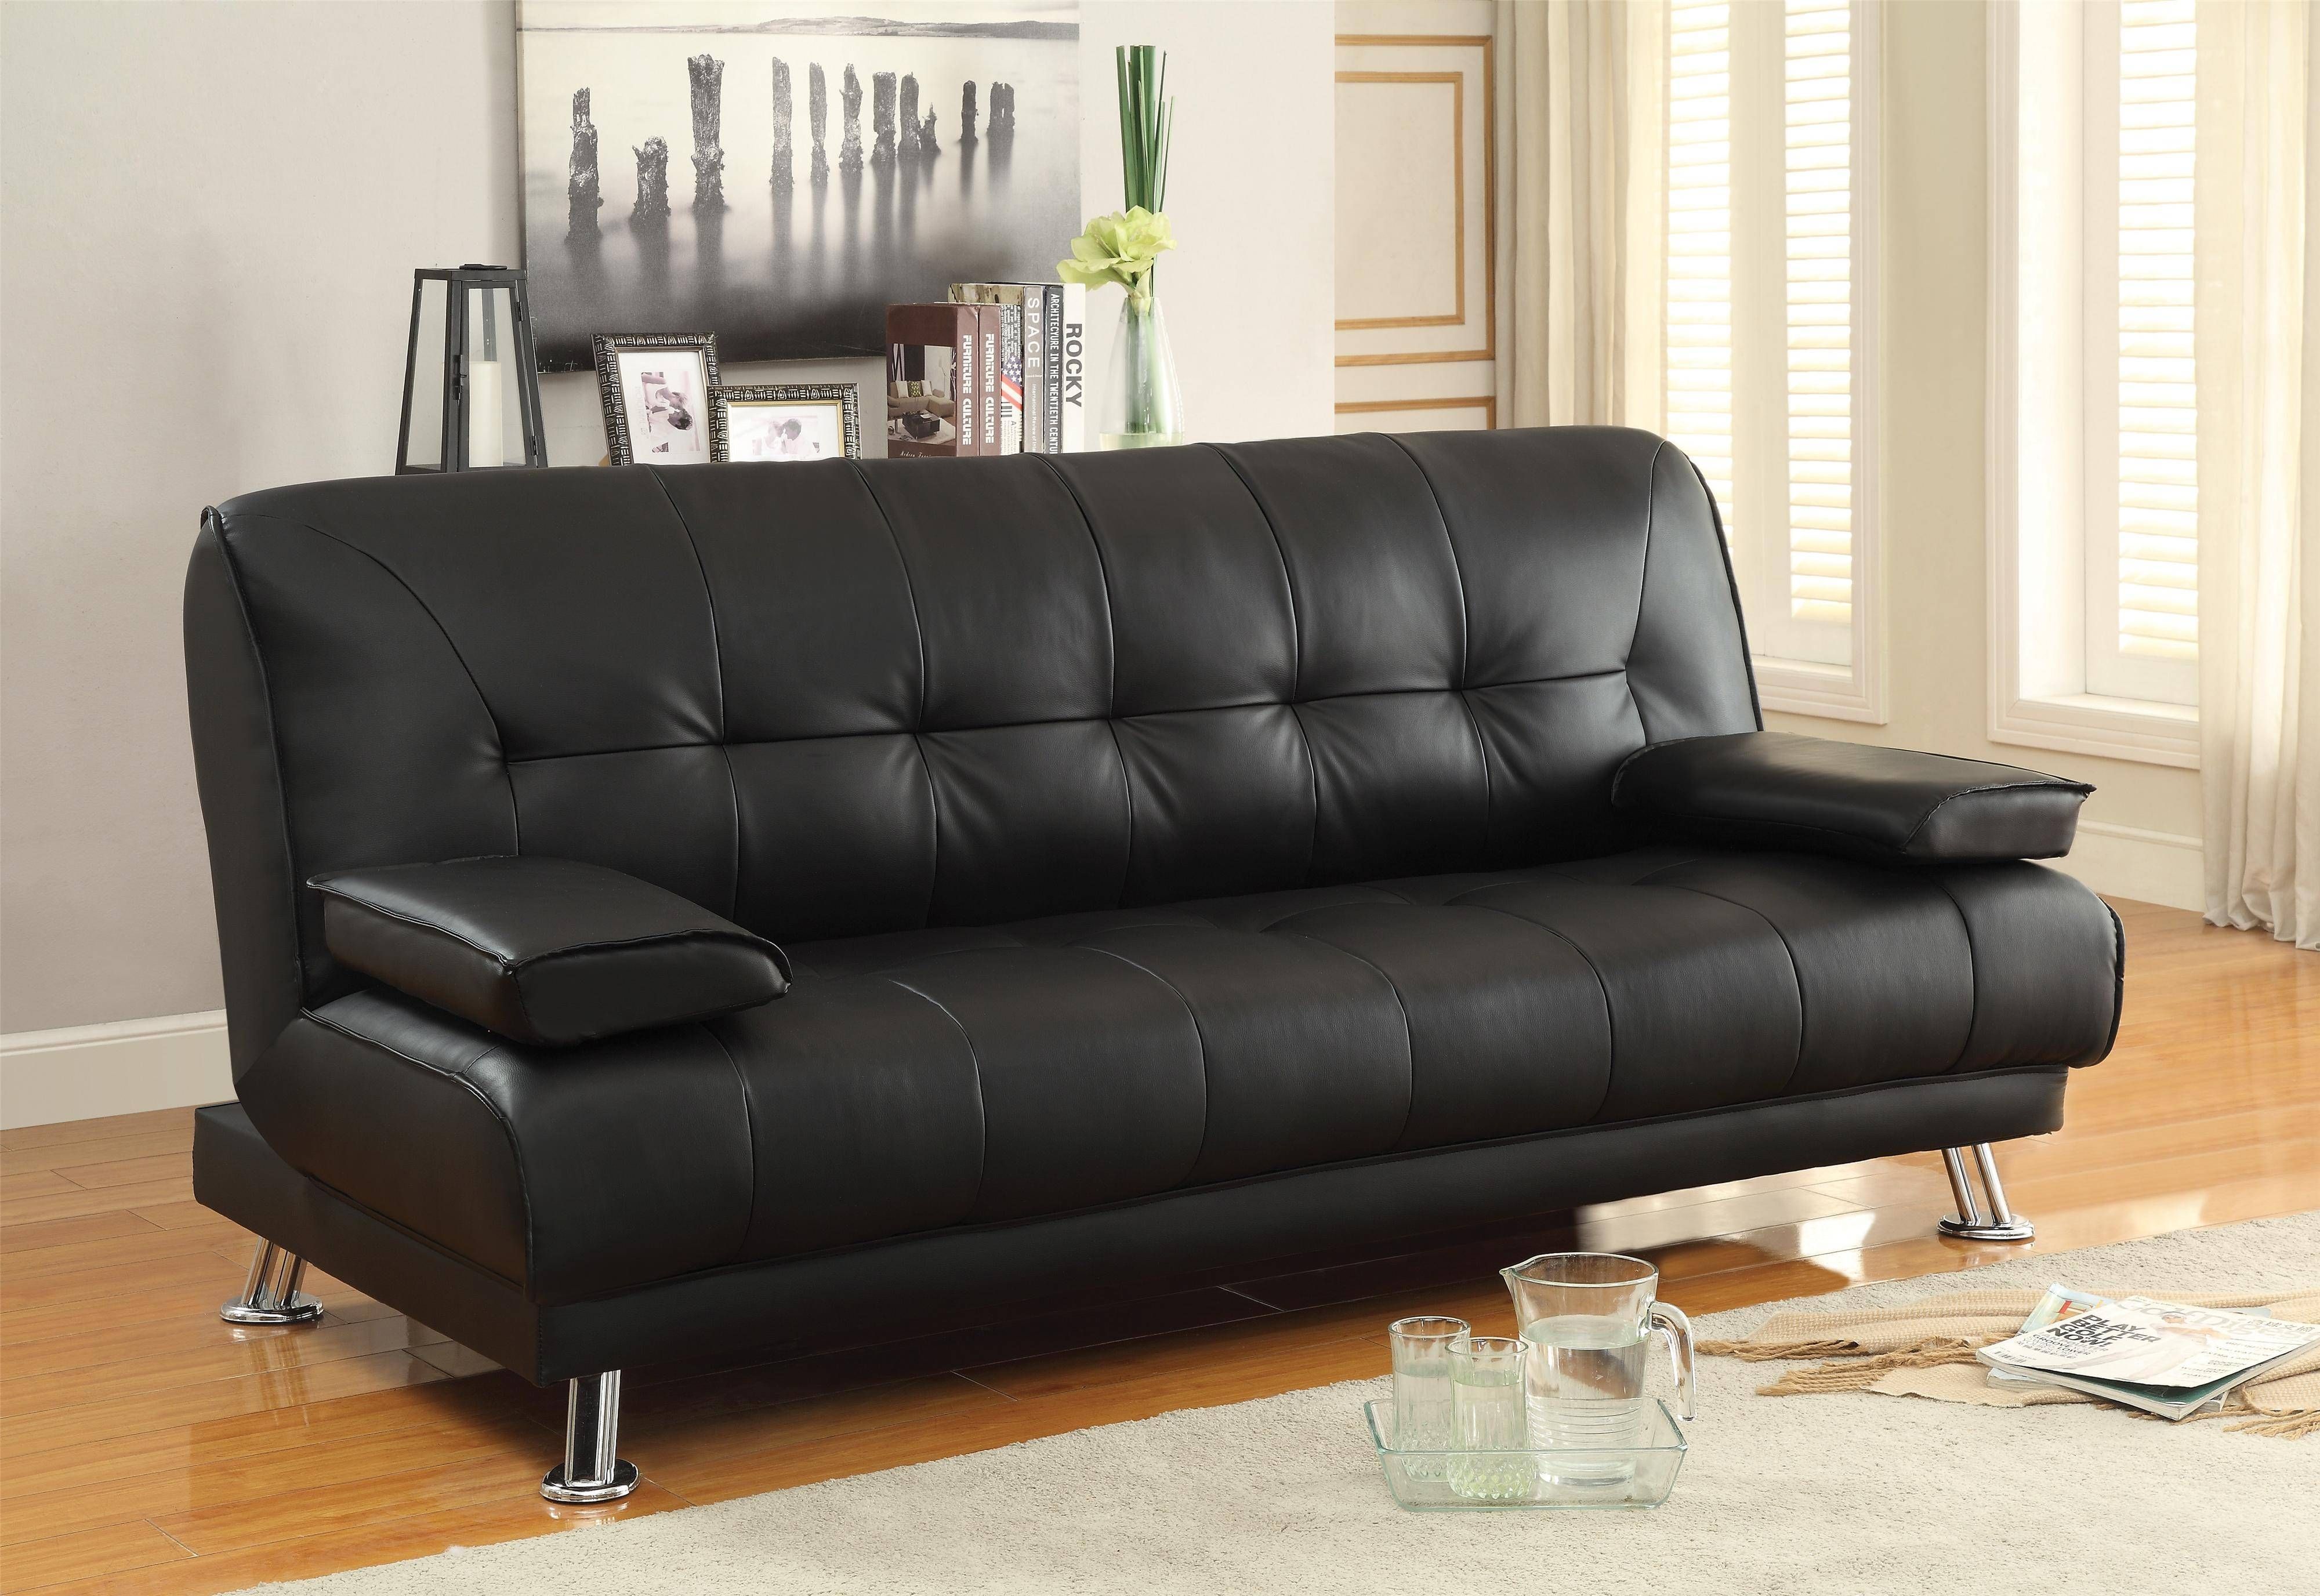 Sofa Beds And Futons Faux Leather Convertible Sofa Bed With Throughout Faux Leather Futon Sofas (View 12 of 15)